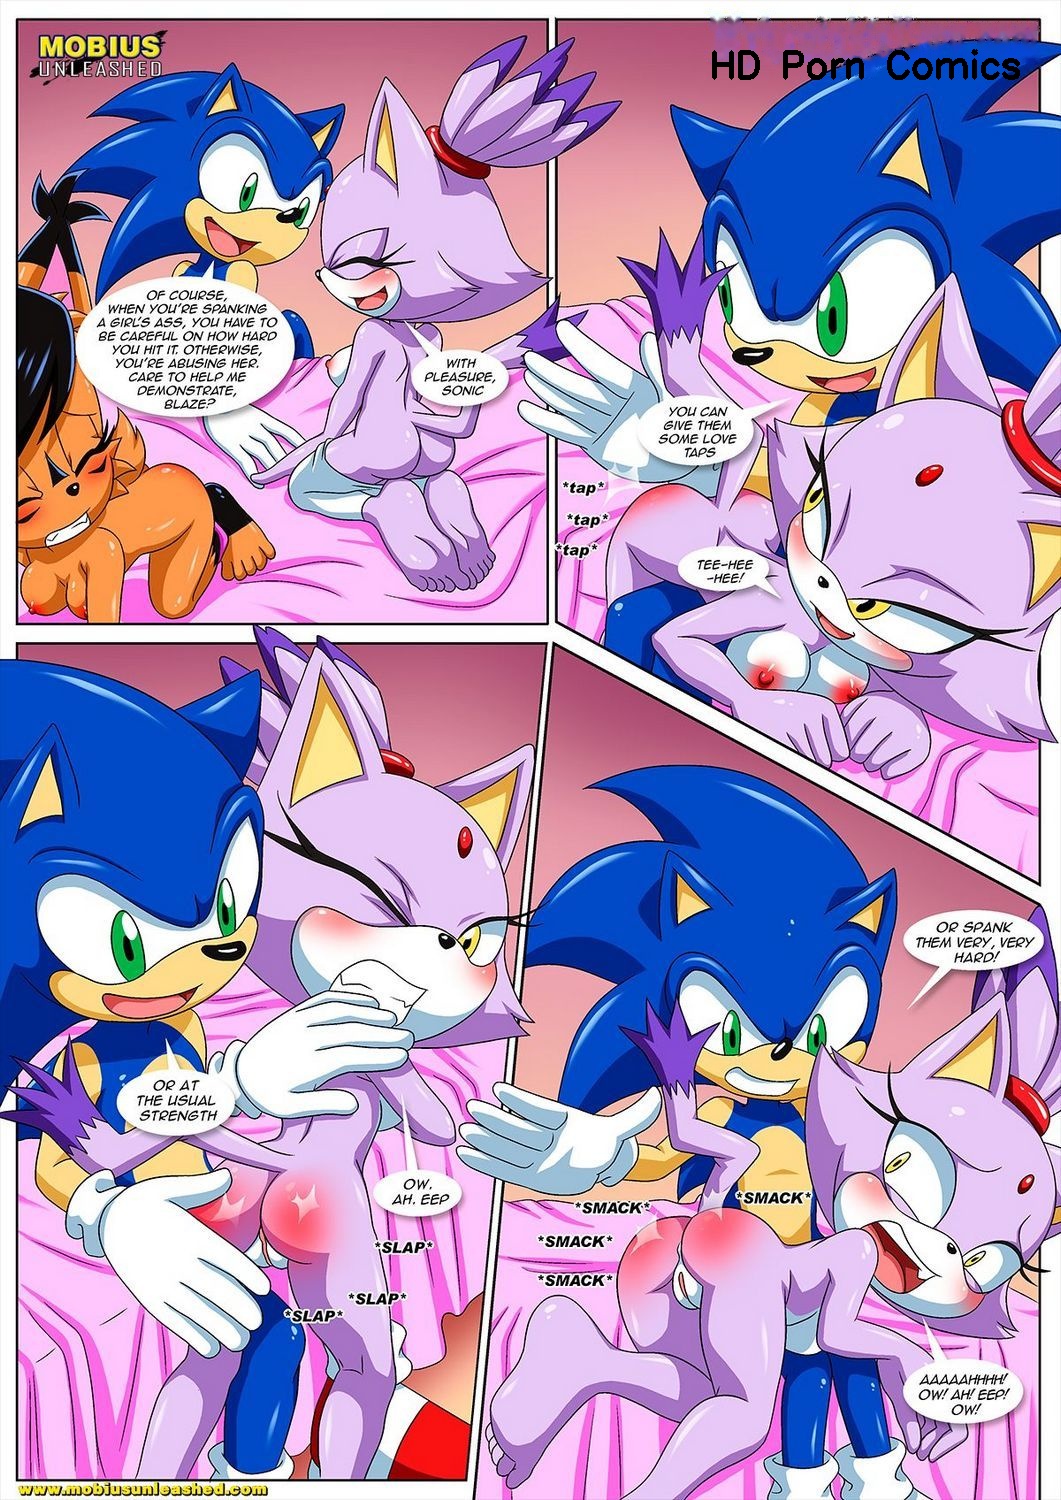 1061px x 1500px - Sonic's Guide To Spanking comic porn - HD Porn Comics